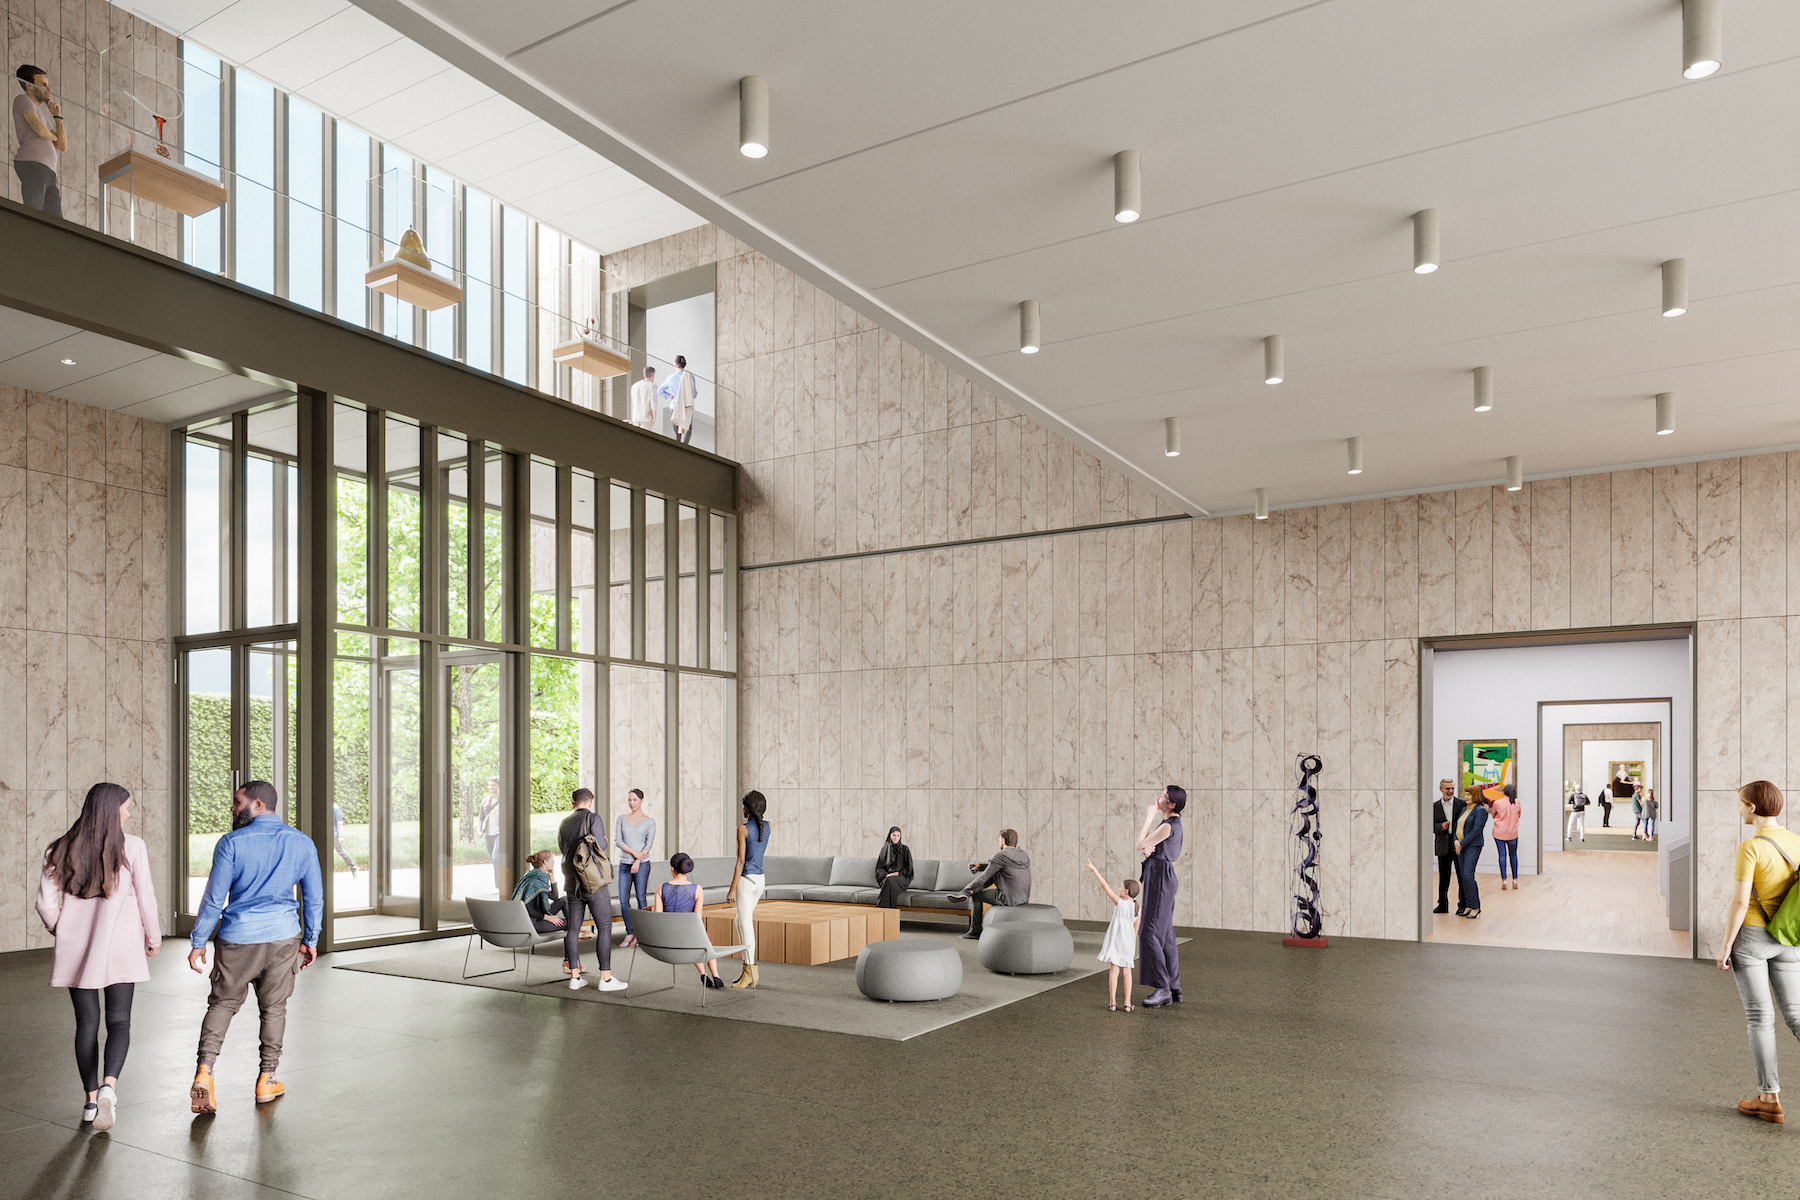 The lobby of the new Palmer Museum of Art at Penn State